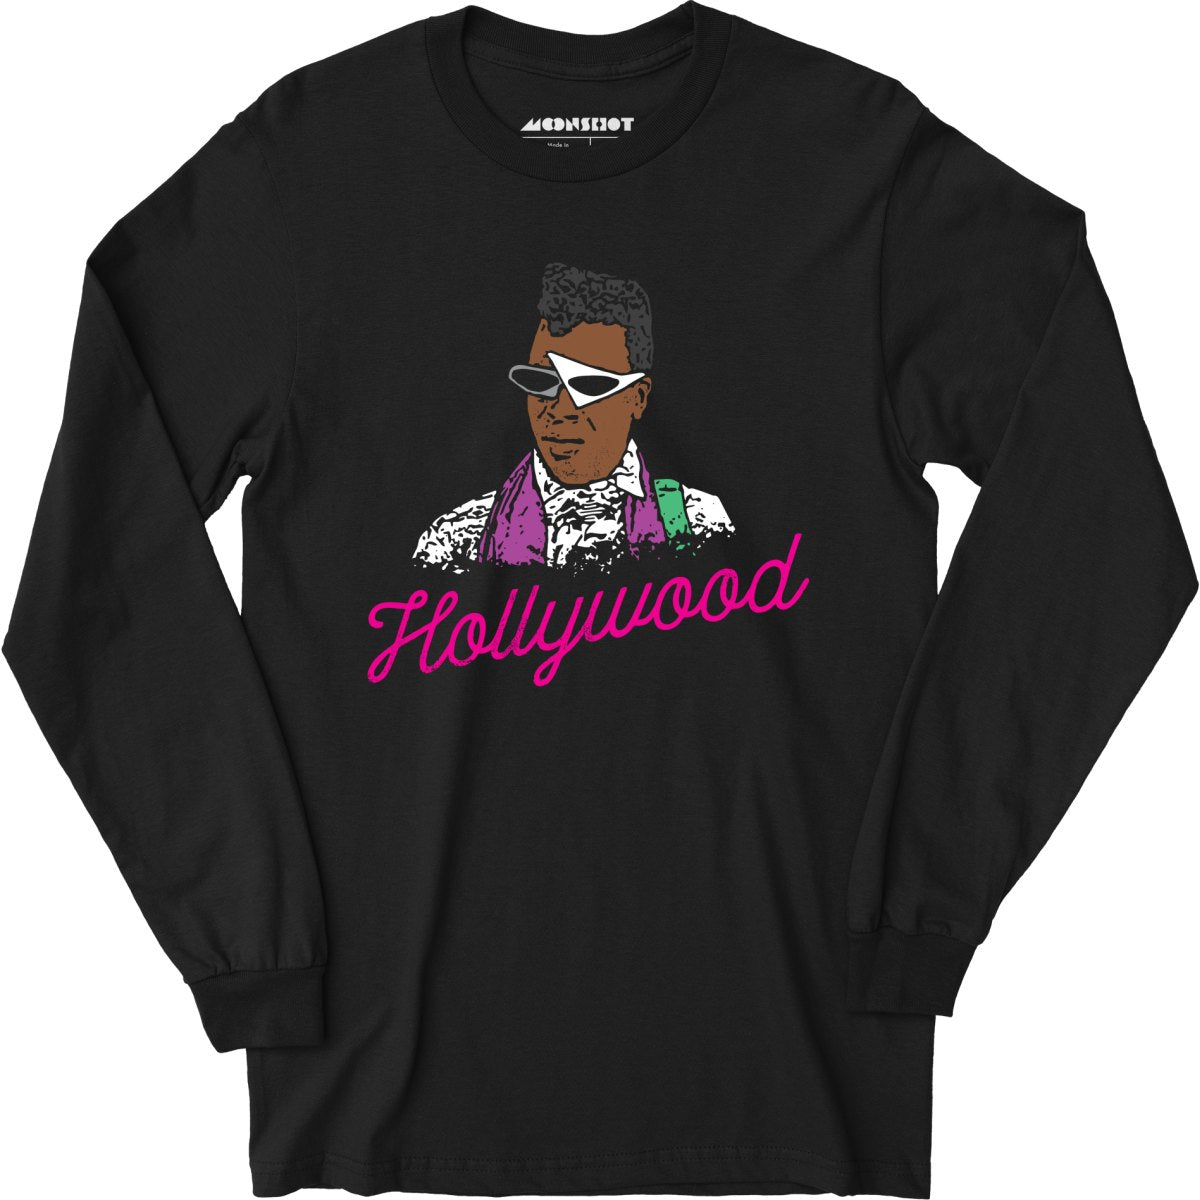 Hollywood - Mannequin - Long Sleeve T-Shirt